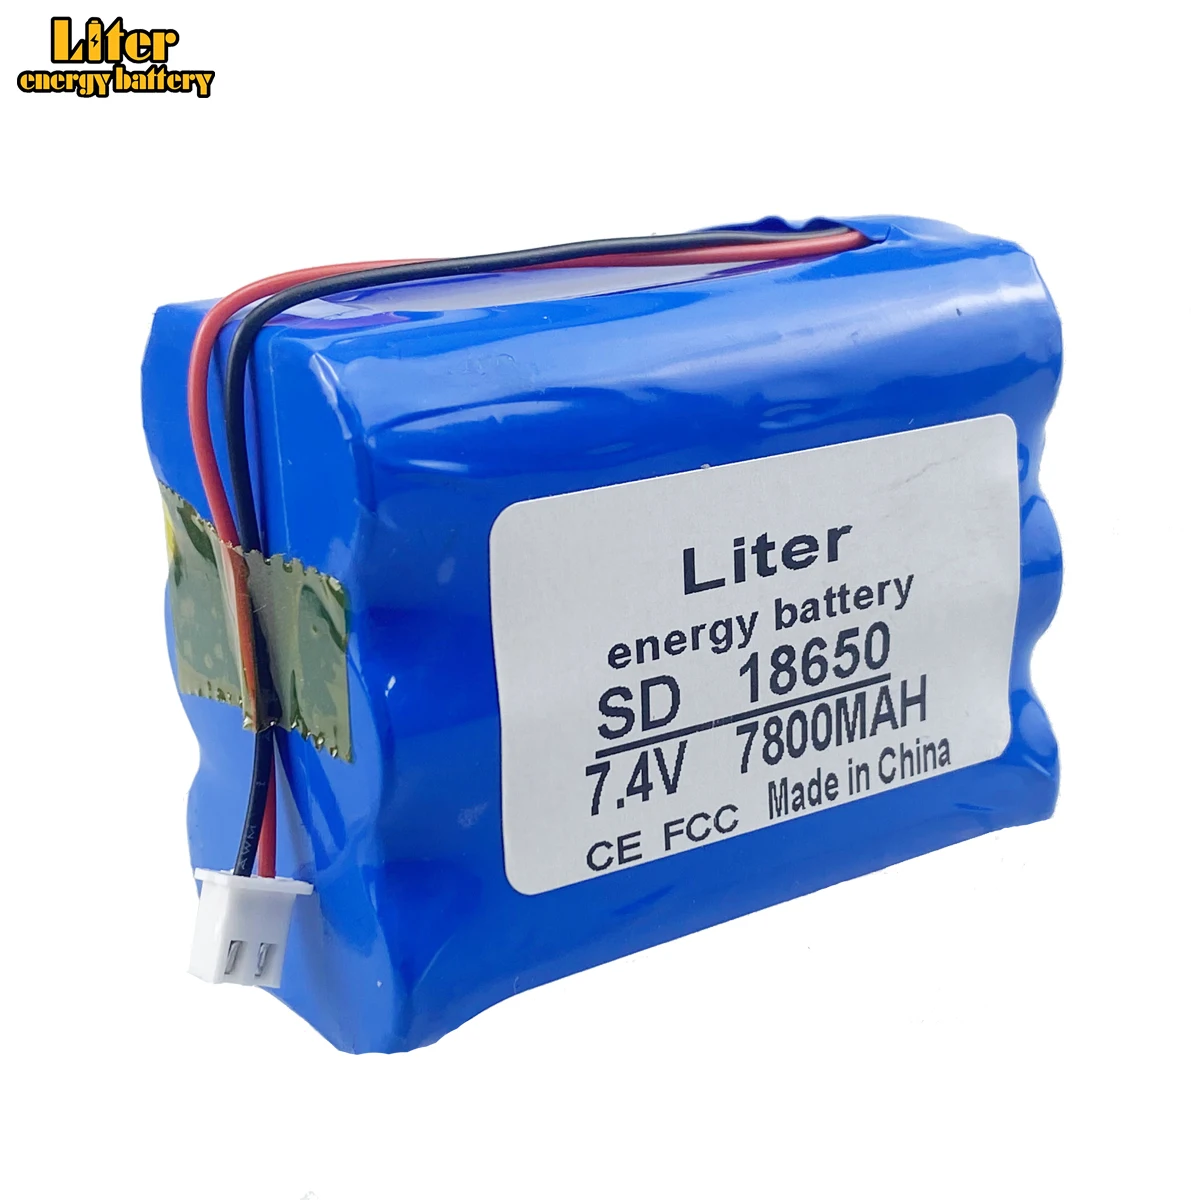 

7.4V 8.4V 7800mAh 3P2S Pack 18650 Battery 7.8Ah Rechargeable Battery For Bicycle Headlights/CCTV/Camera/Electric 5.0 4 Review